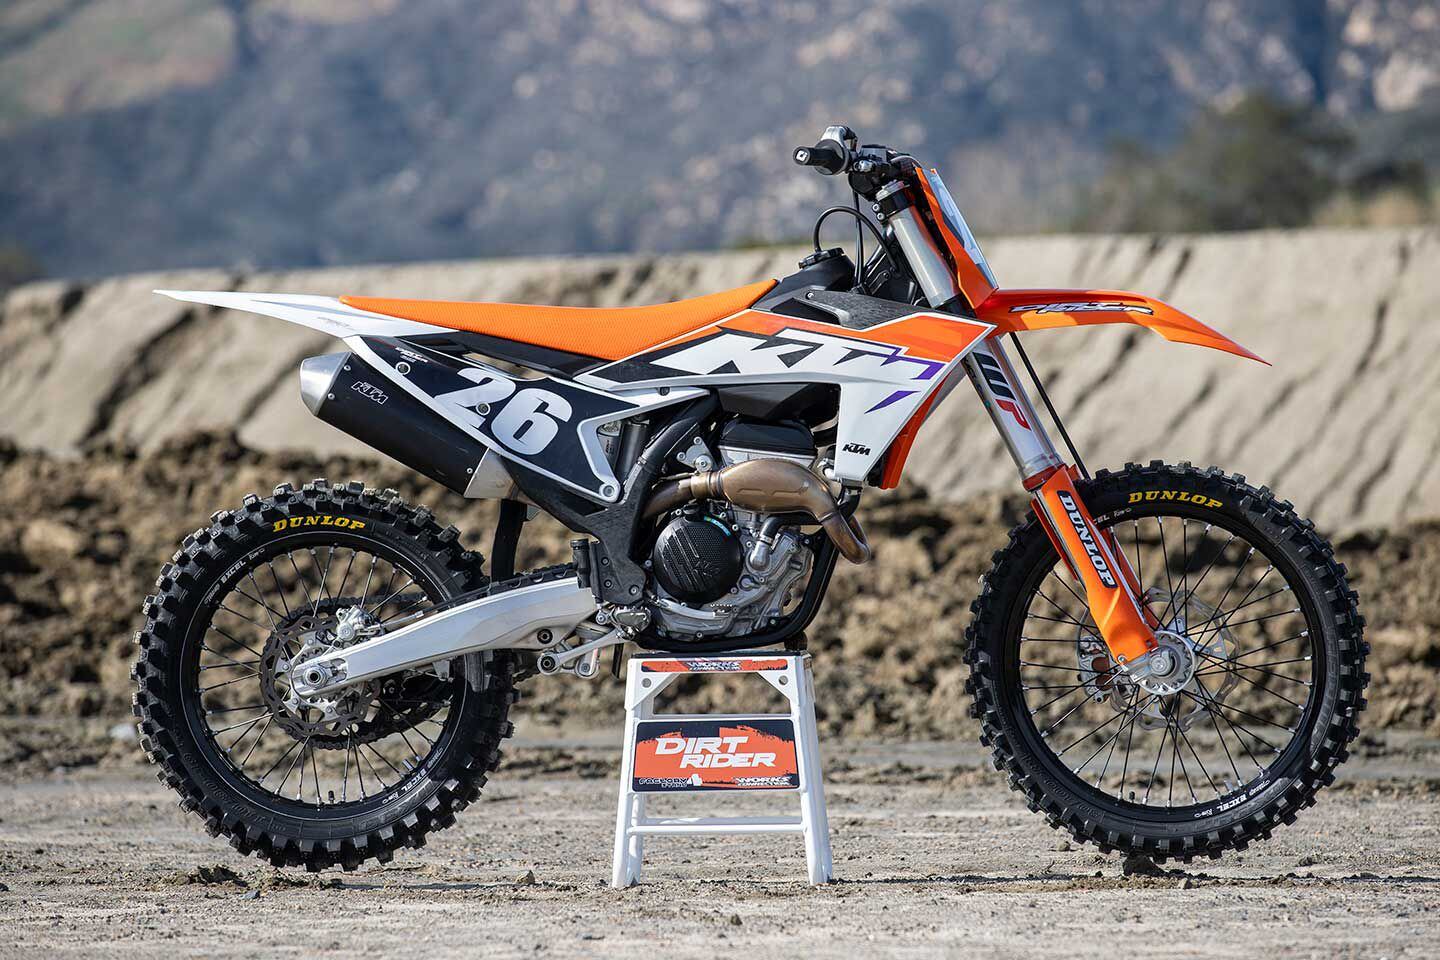 Fully overhauled for 2023, KTM’s 250 SX-F features a more compact engine, updated WP Xact 48mm air fork, shorter shock, more rigid frame, new bodywork, and the addition of a quickshifter (QS).